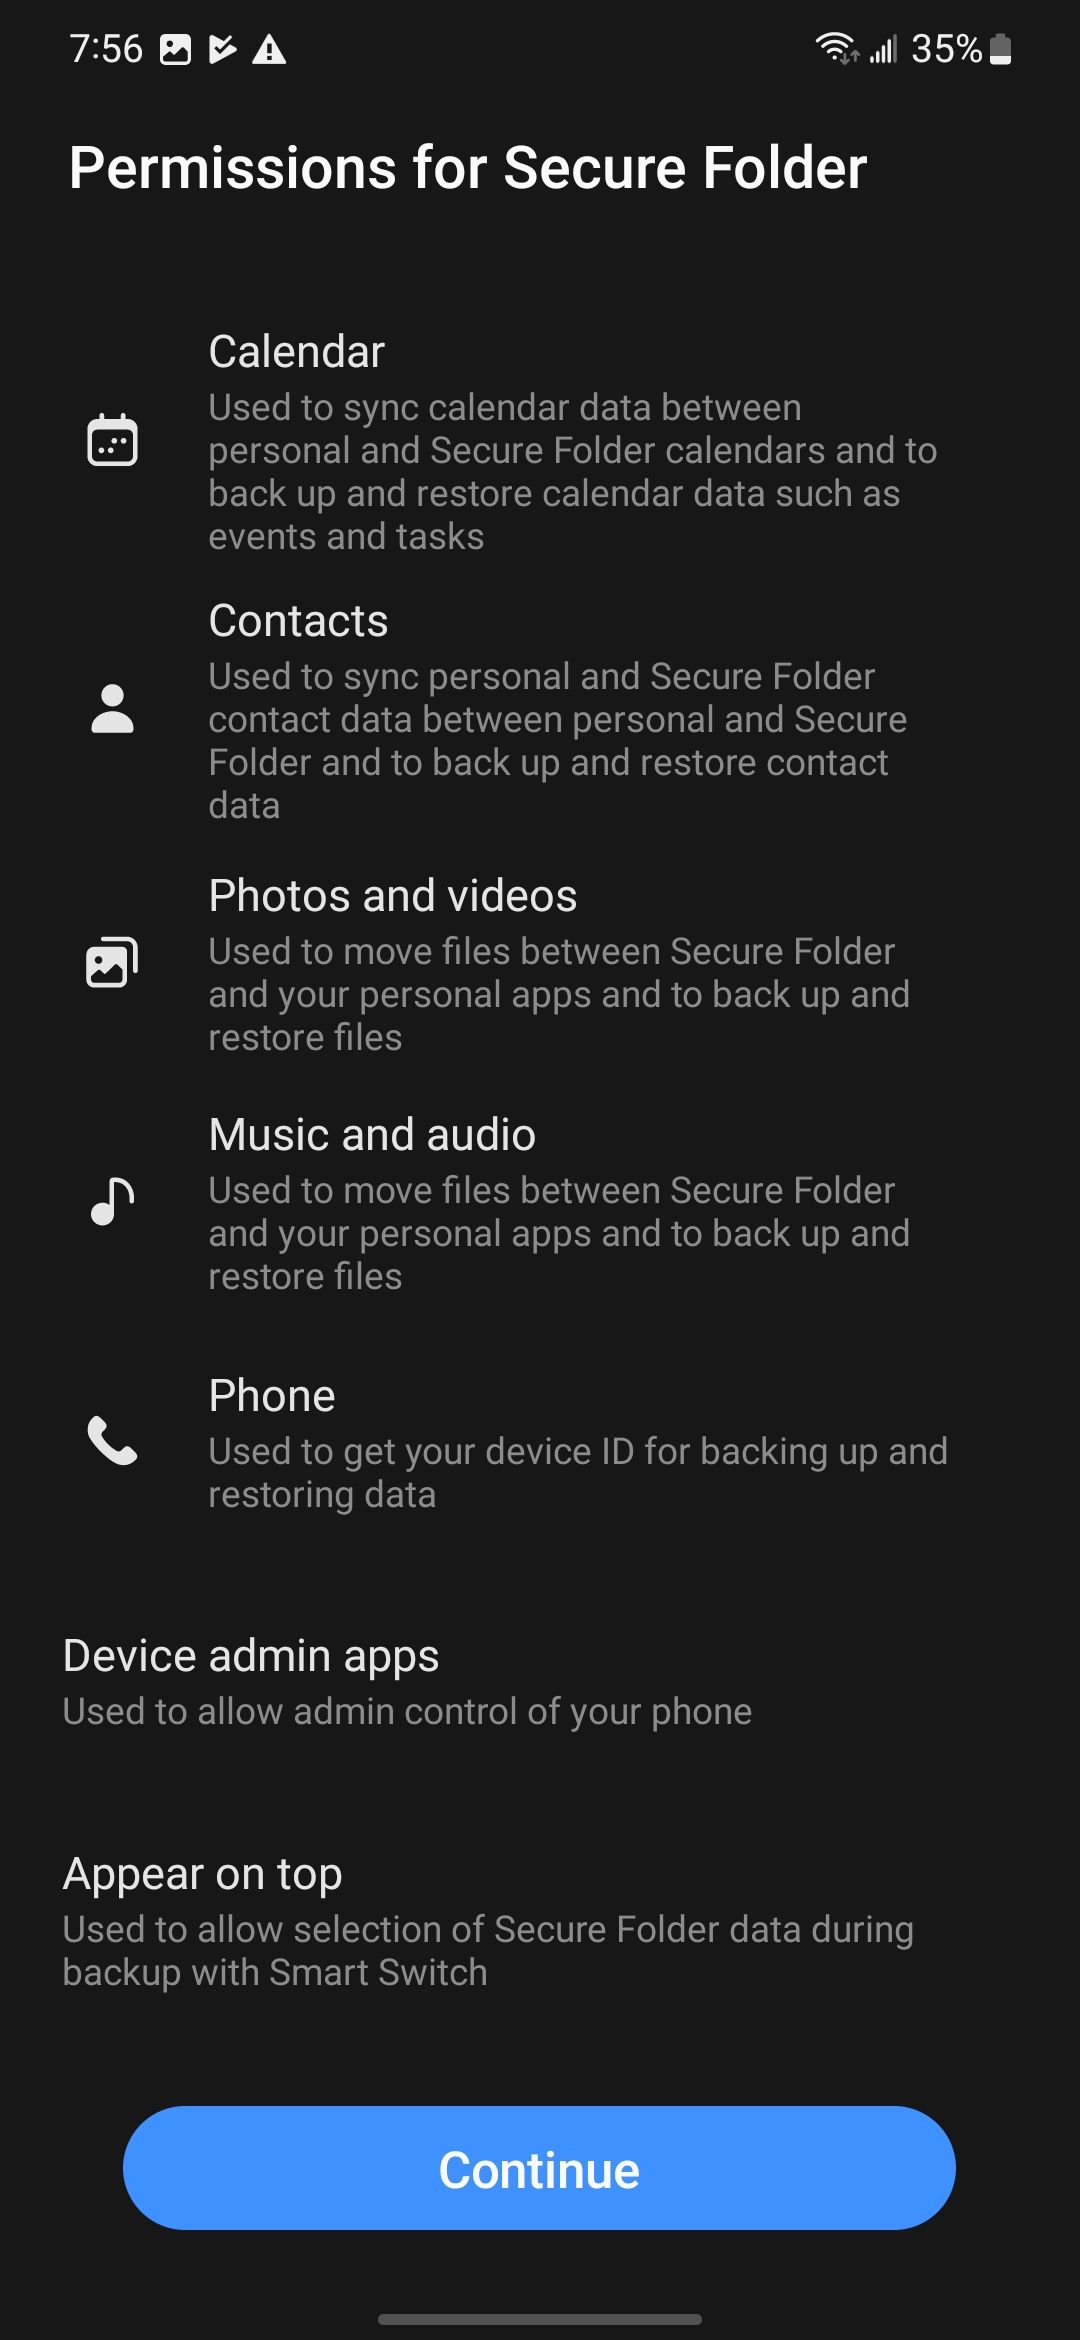 The list of permissions needed to use the Secure Folder app